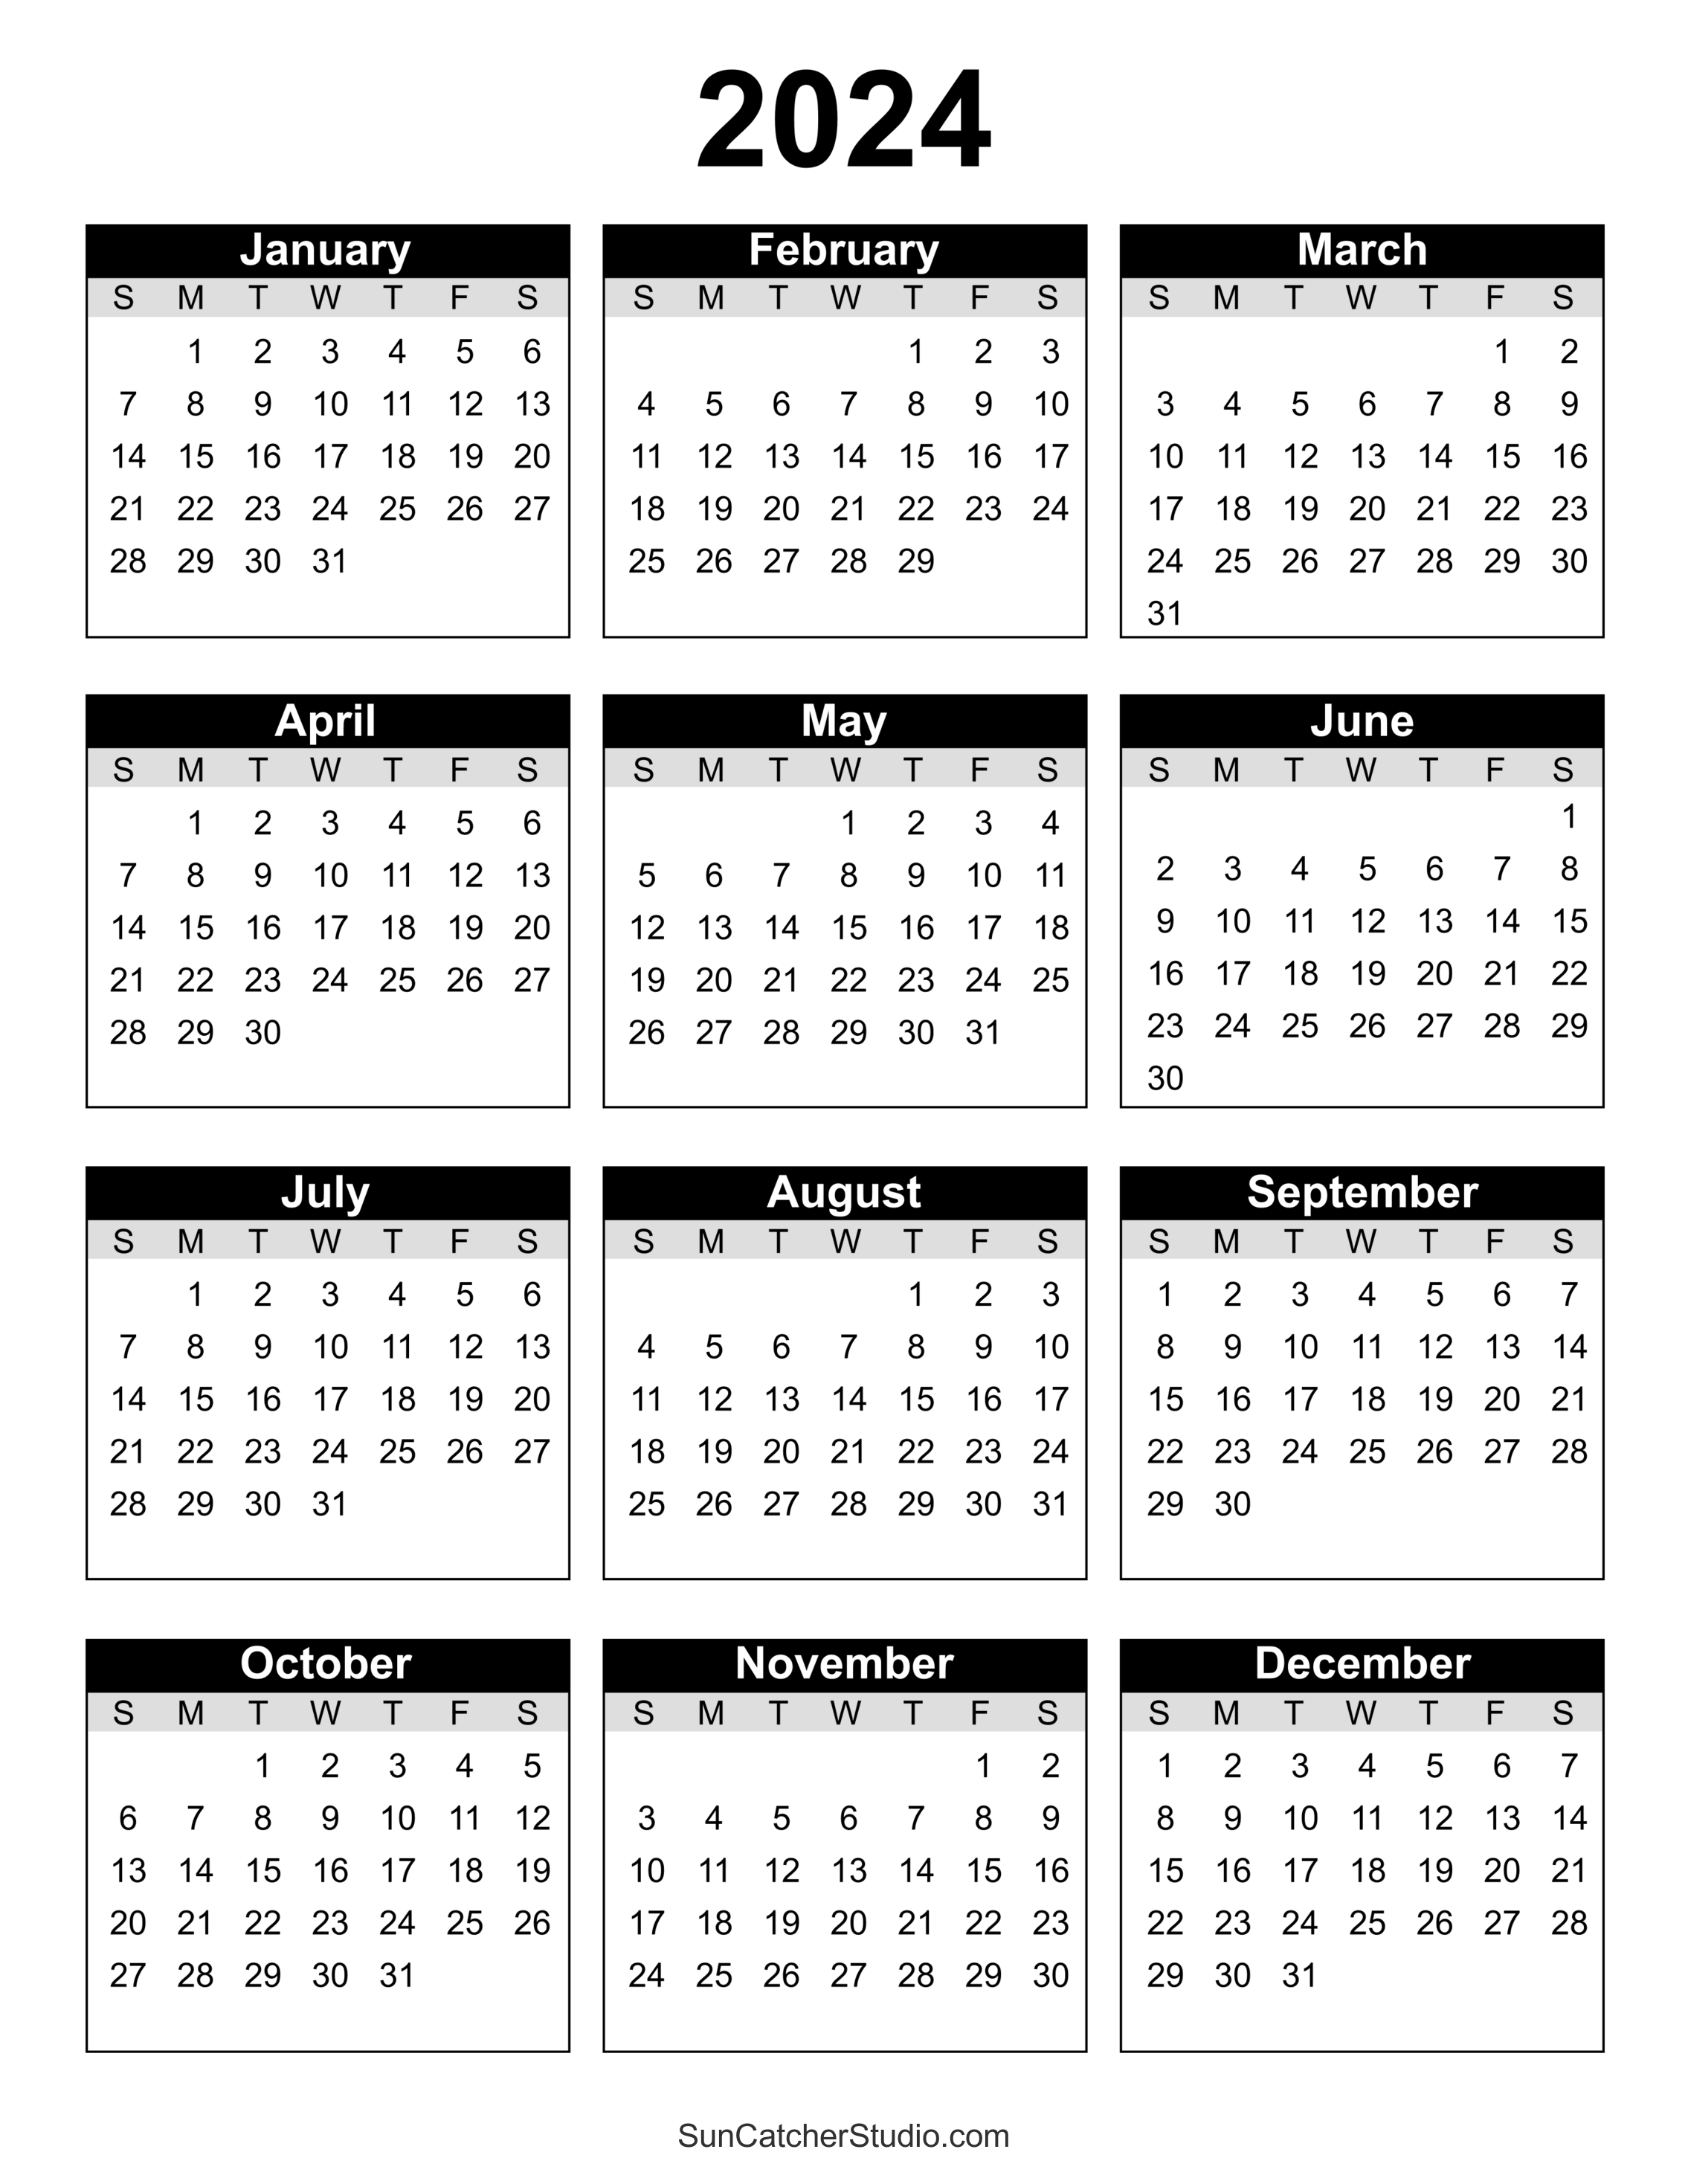 free-printable-2024-yearly-calendar-diy-projects-patterns-monograms